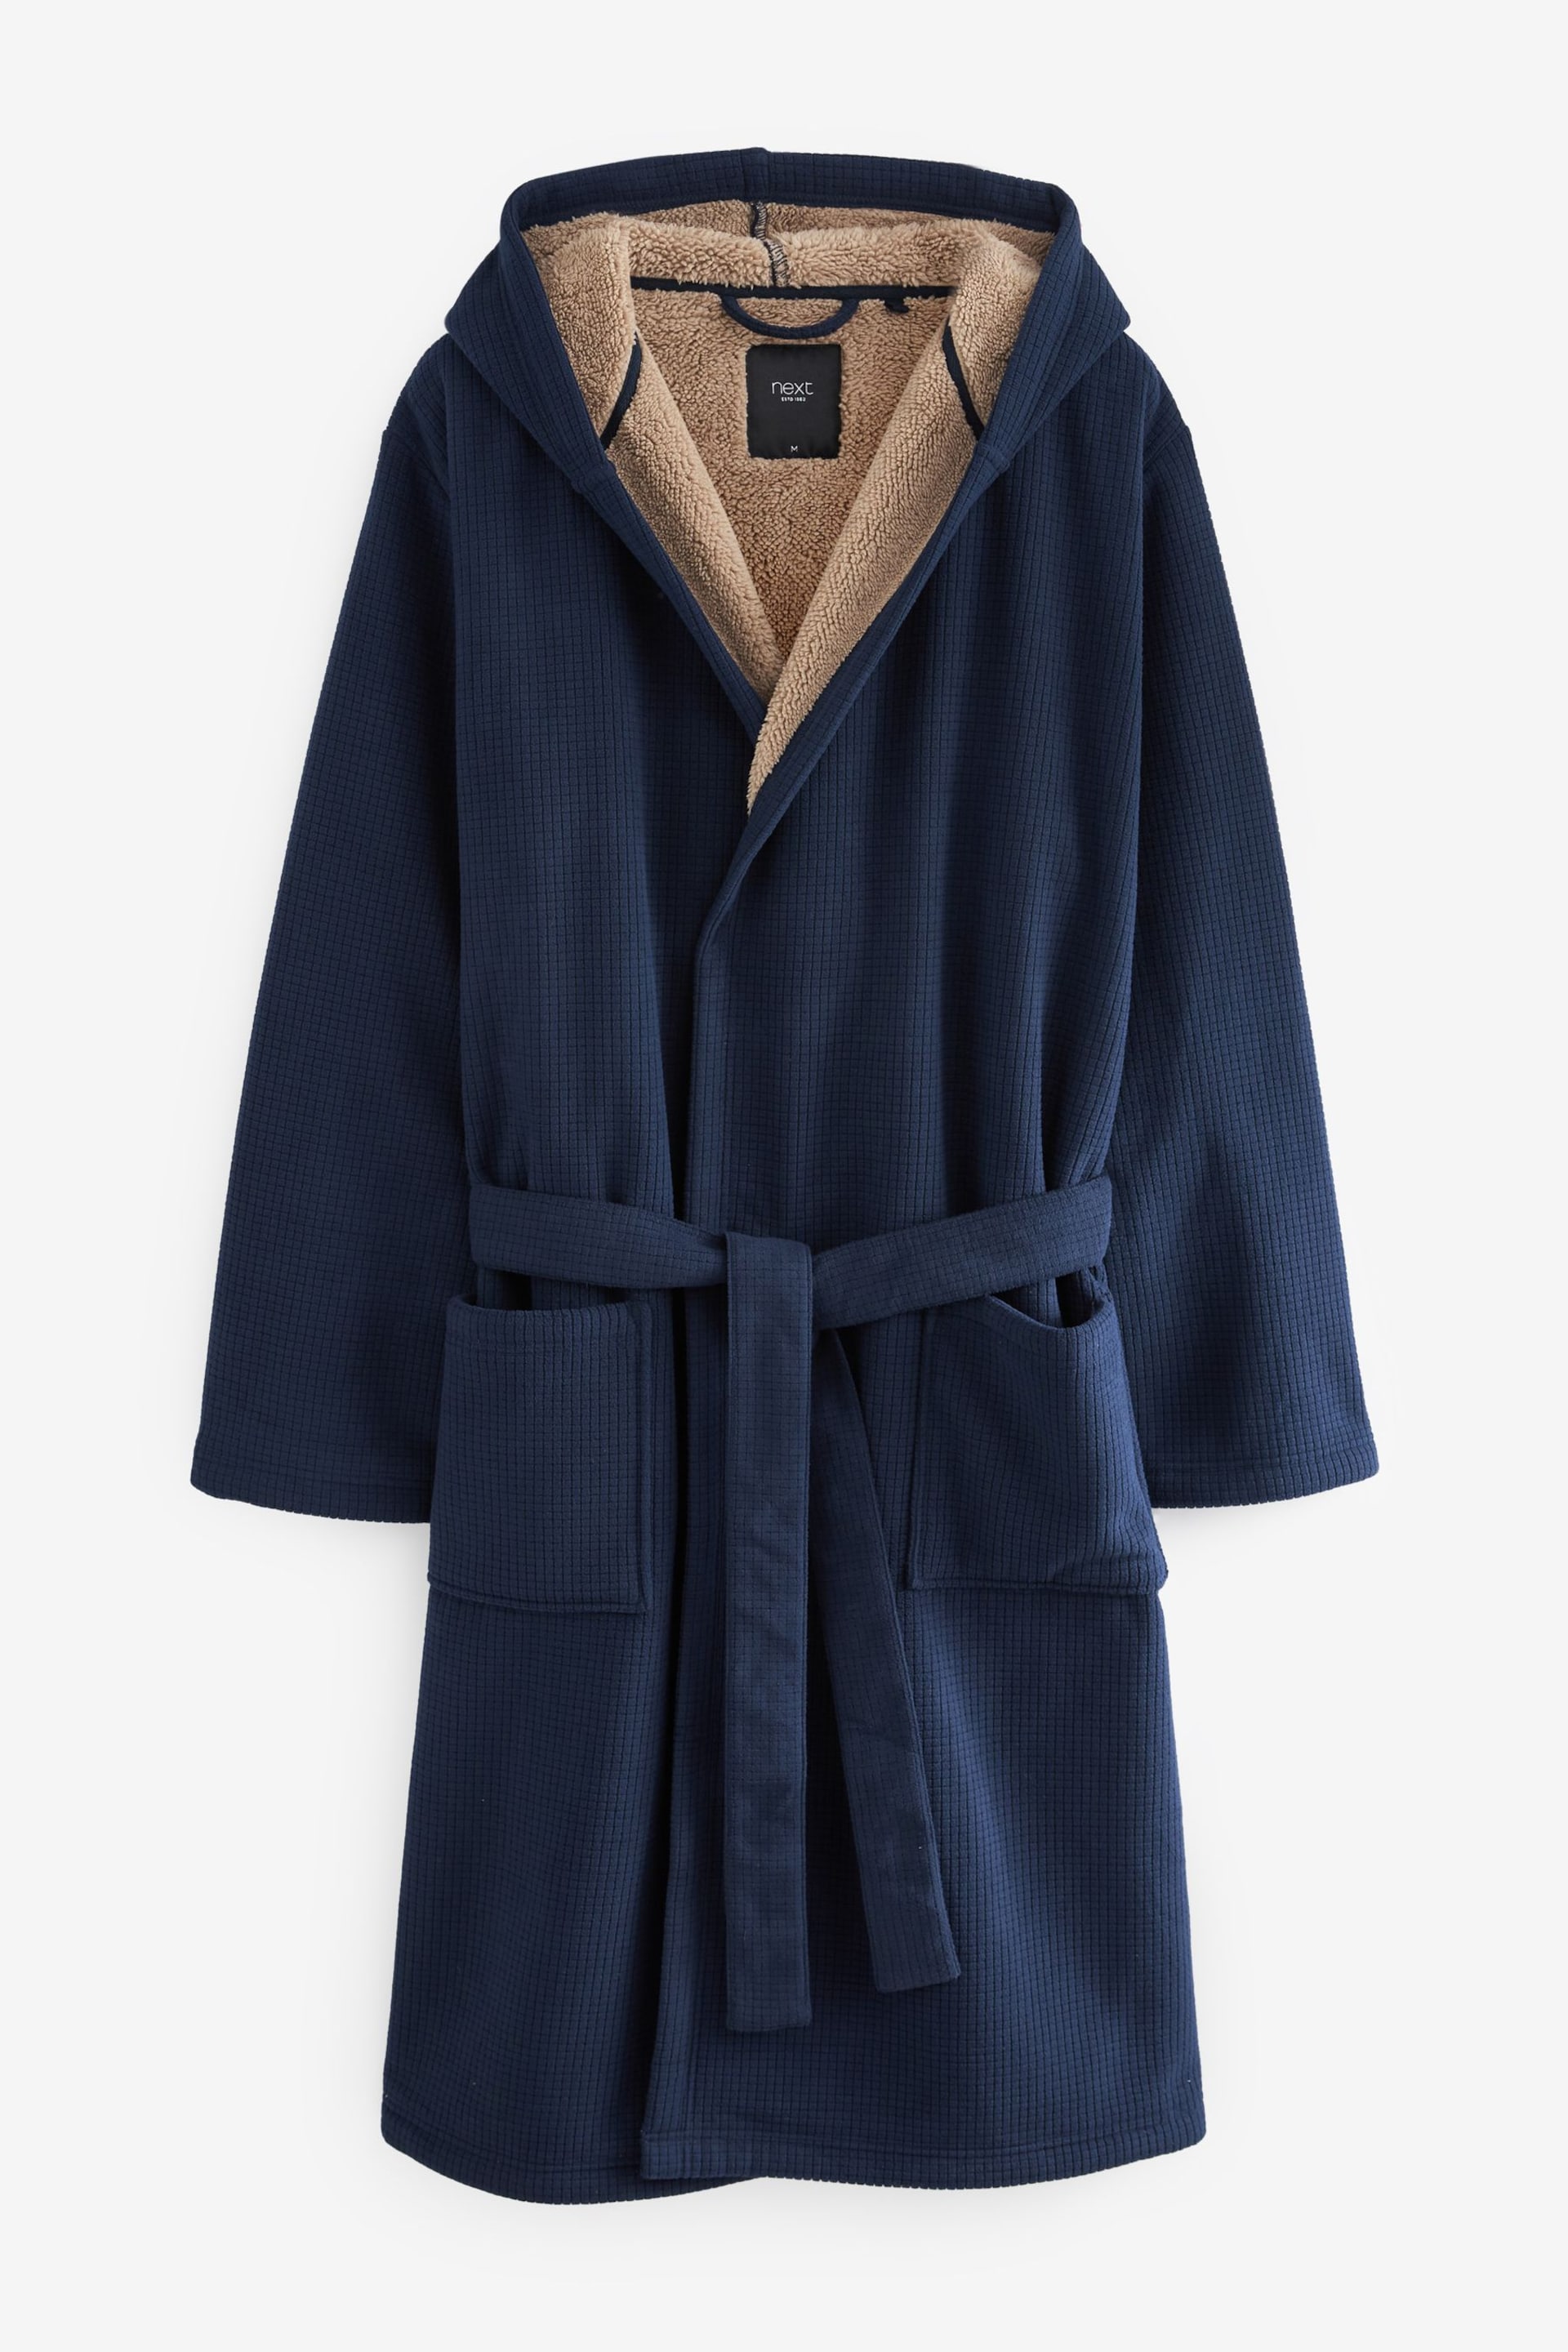 Navy Blue Borg Lined Hooded Dressing Gown - Image 7 of 10